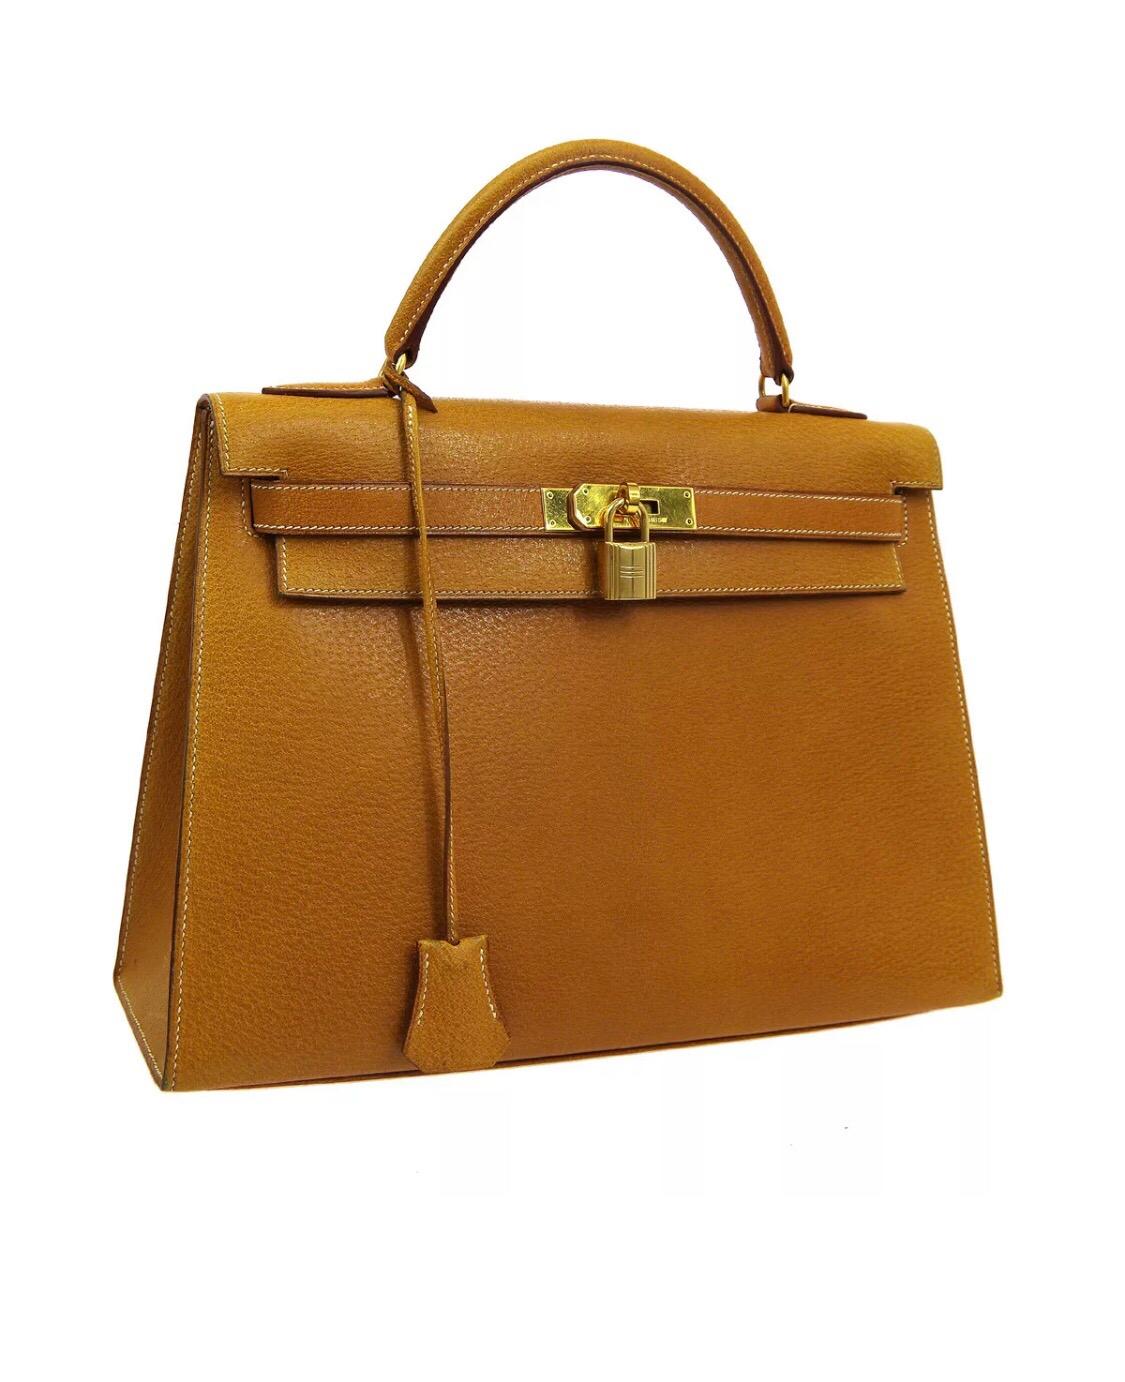 Hermes Kelly 32 Cognac Tan Leather Gold Top Handle Satchel Shoulder Bag

Leather
Gold tone hardware
Leather lining
Date code present
Made in France
Handle drop 3.5